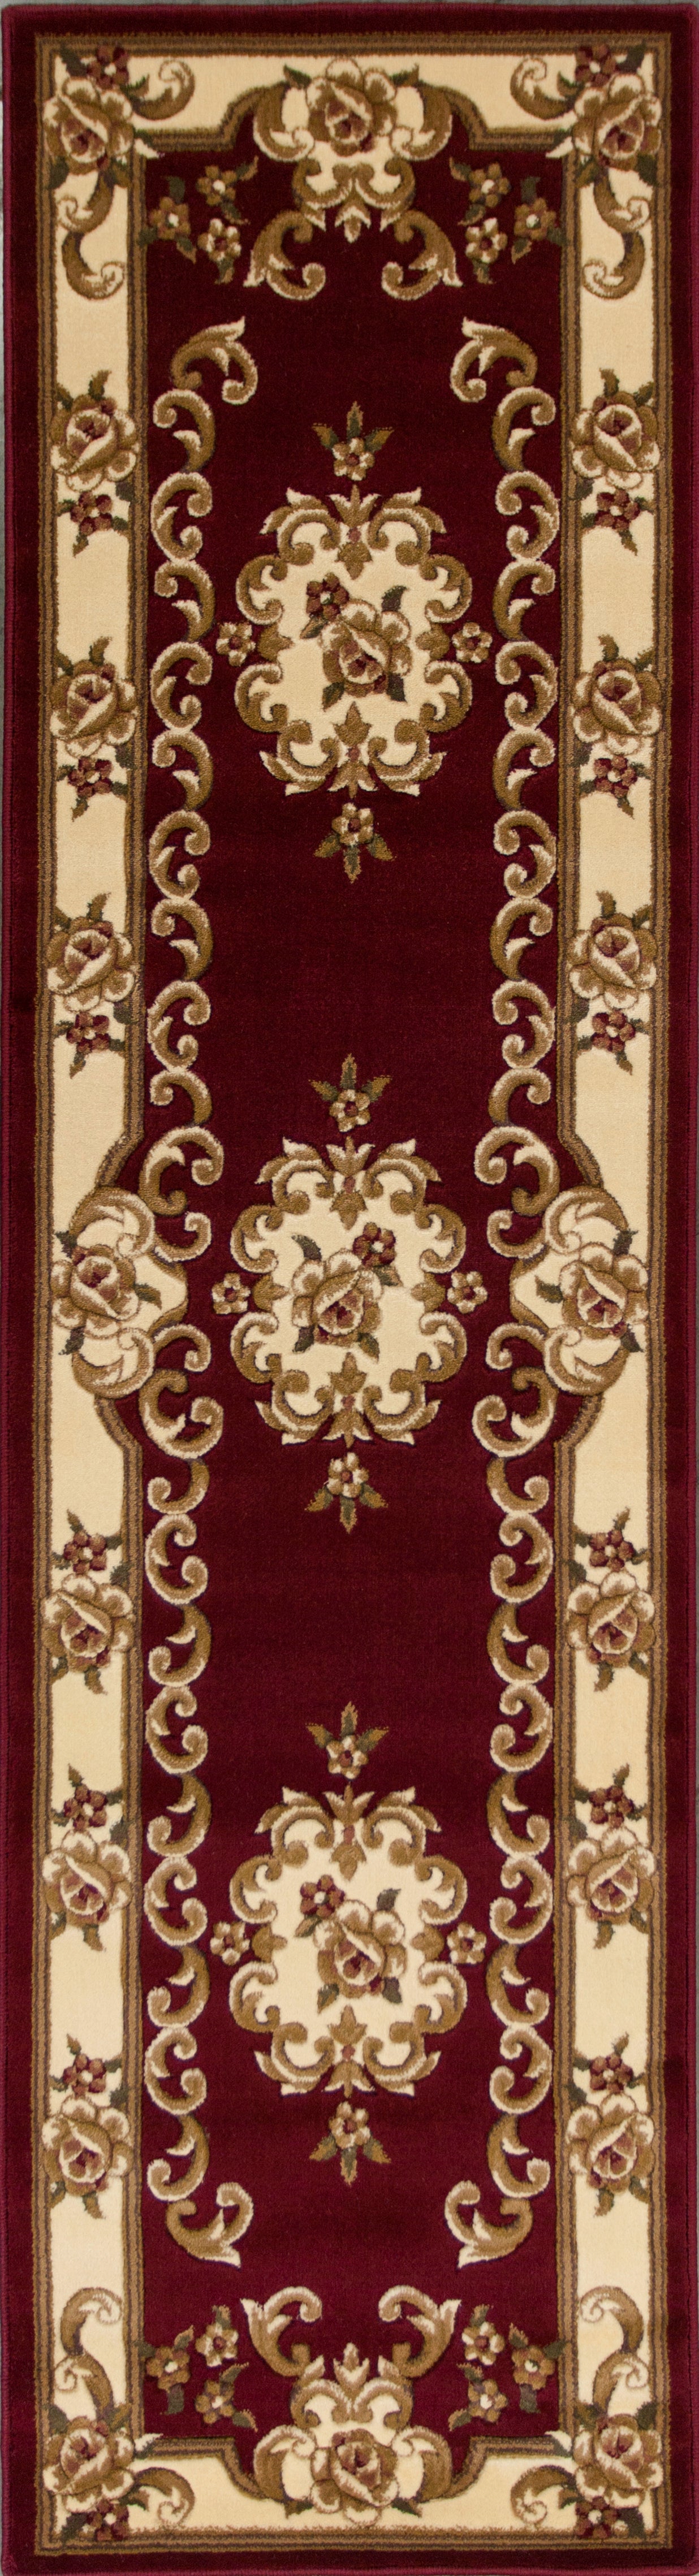 Corinthian 530 Machine-Made Synthetic Blend Indoor Area Rug From KAS Rugs